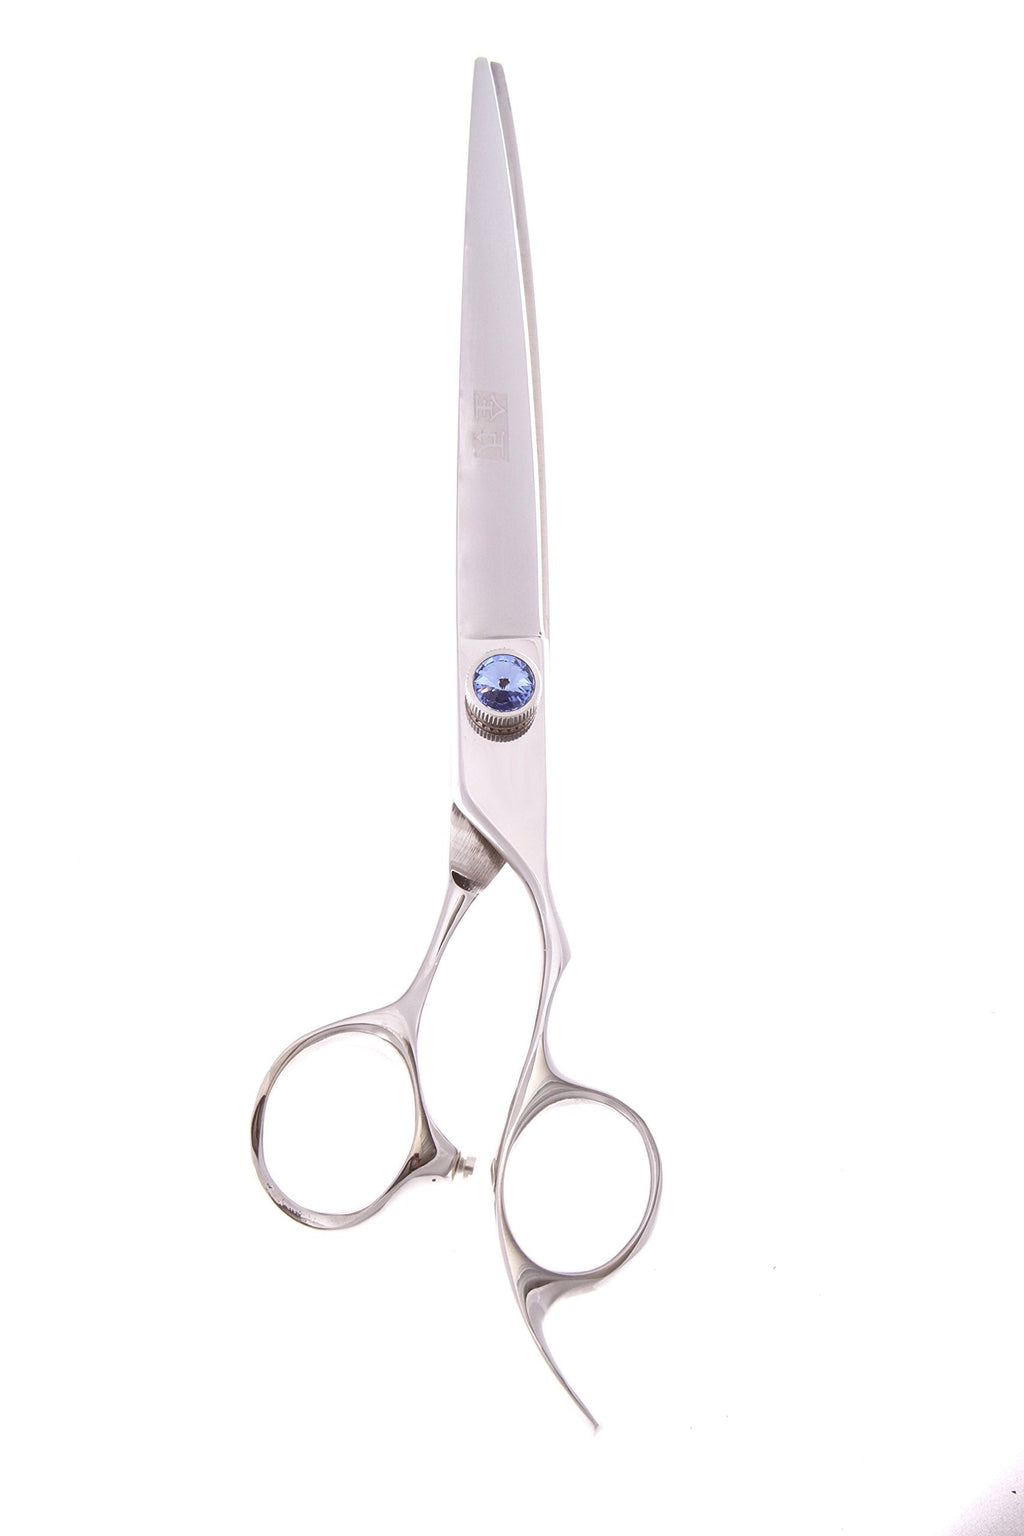 [Australia] - ShearsDirect Curved Pro Shear with Blue Gem Stone Tension and Ergonomic Handle Design Scissors, 8.5" 